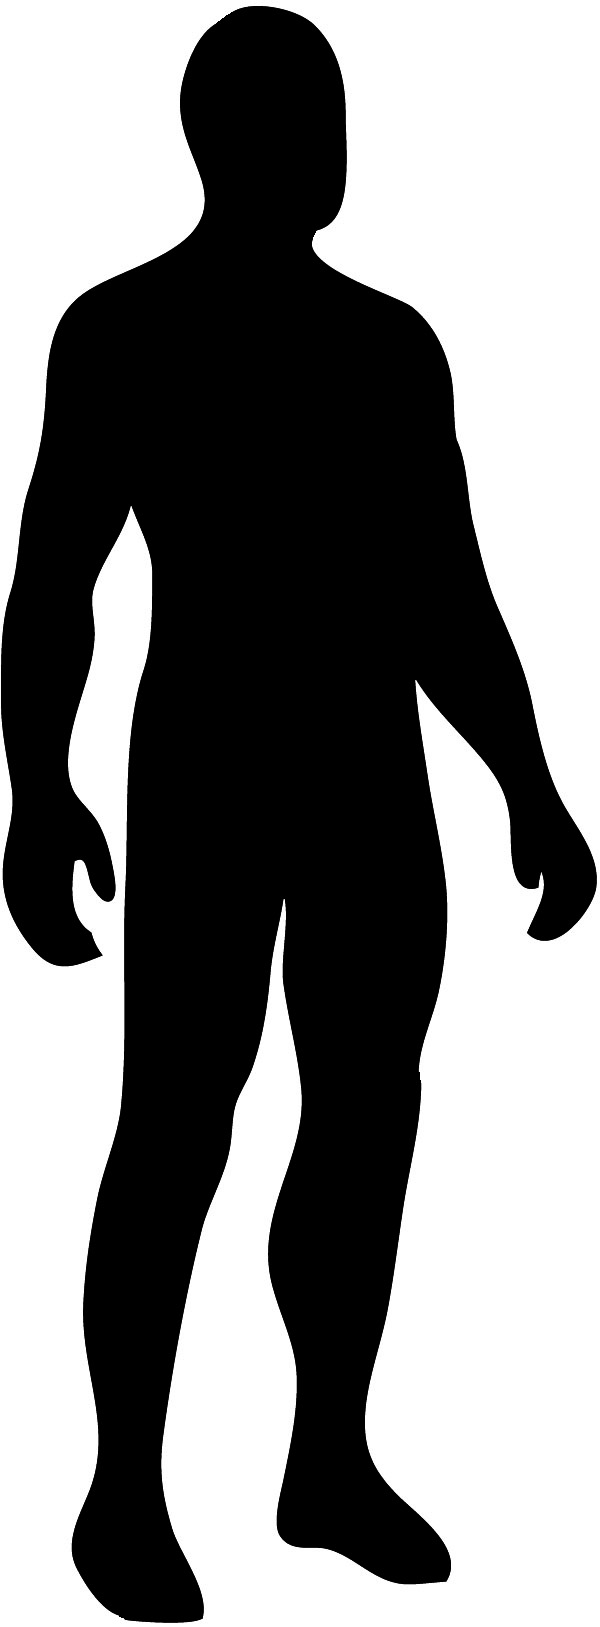 Outline Standing Human - ClipArt Best